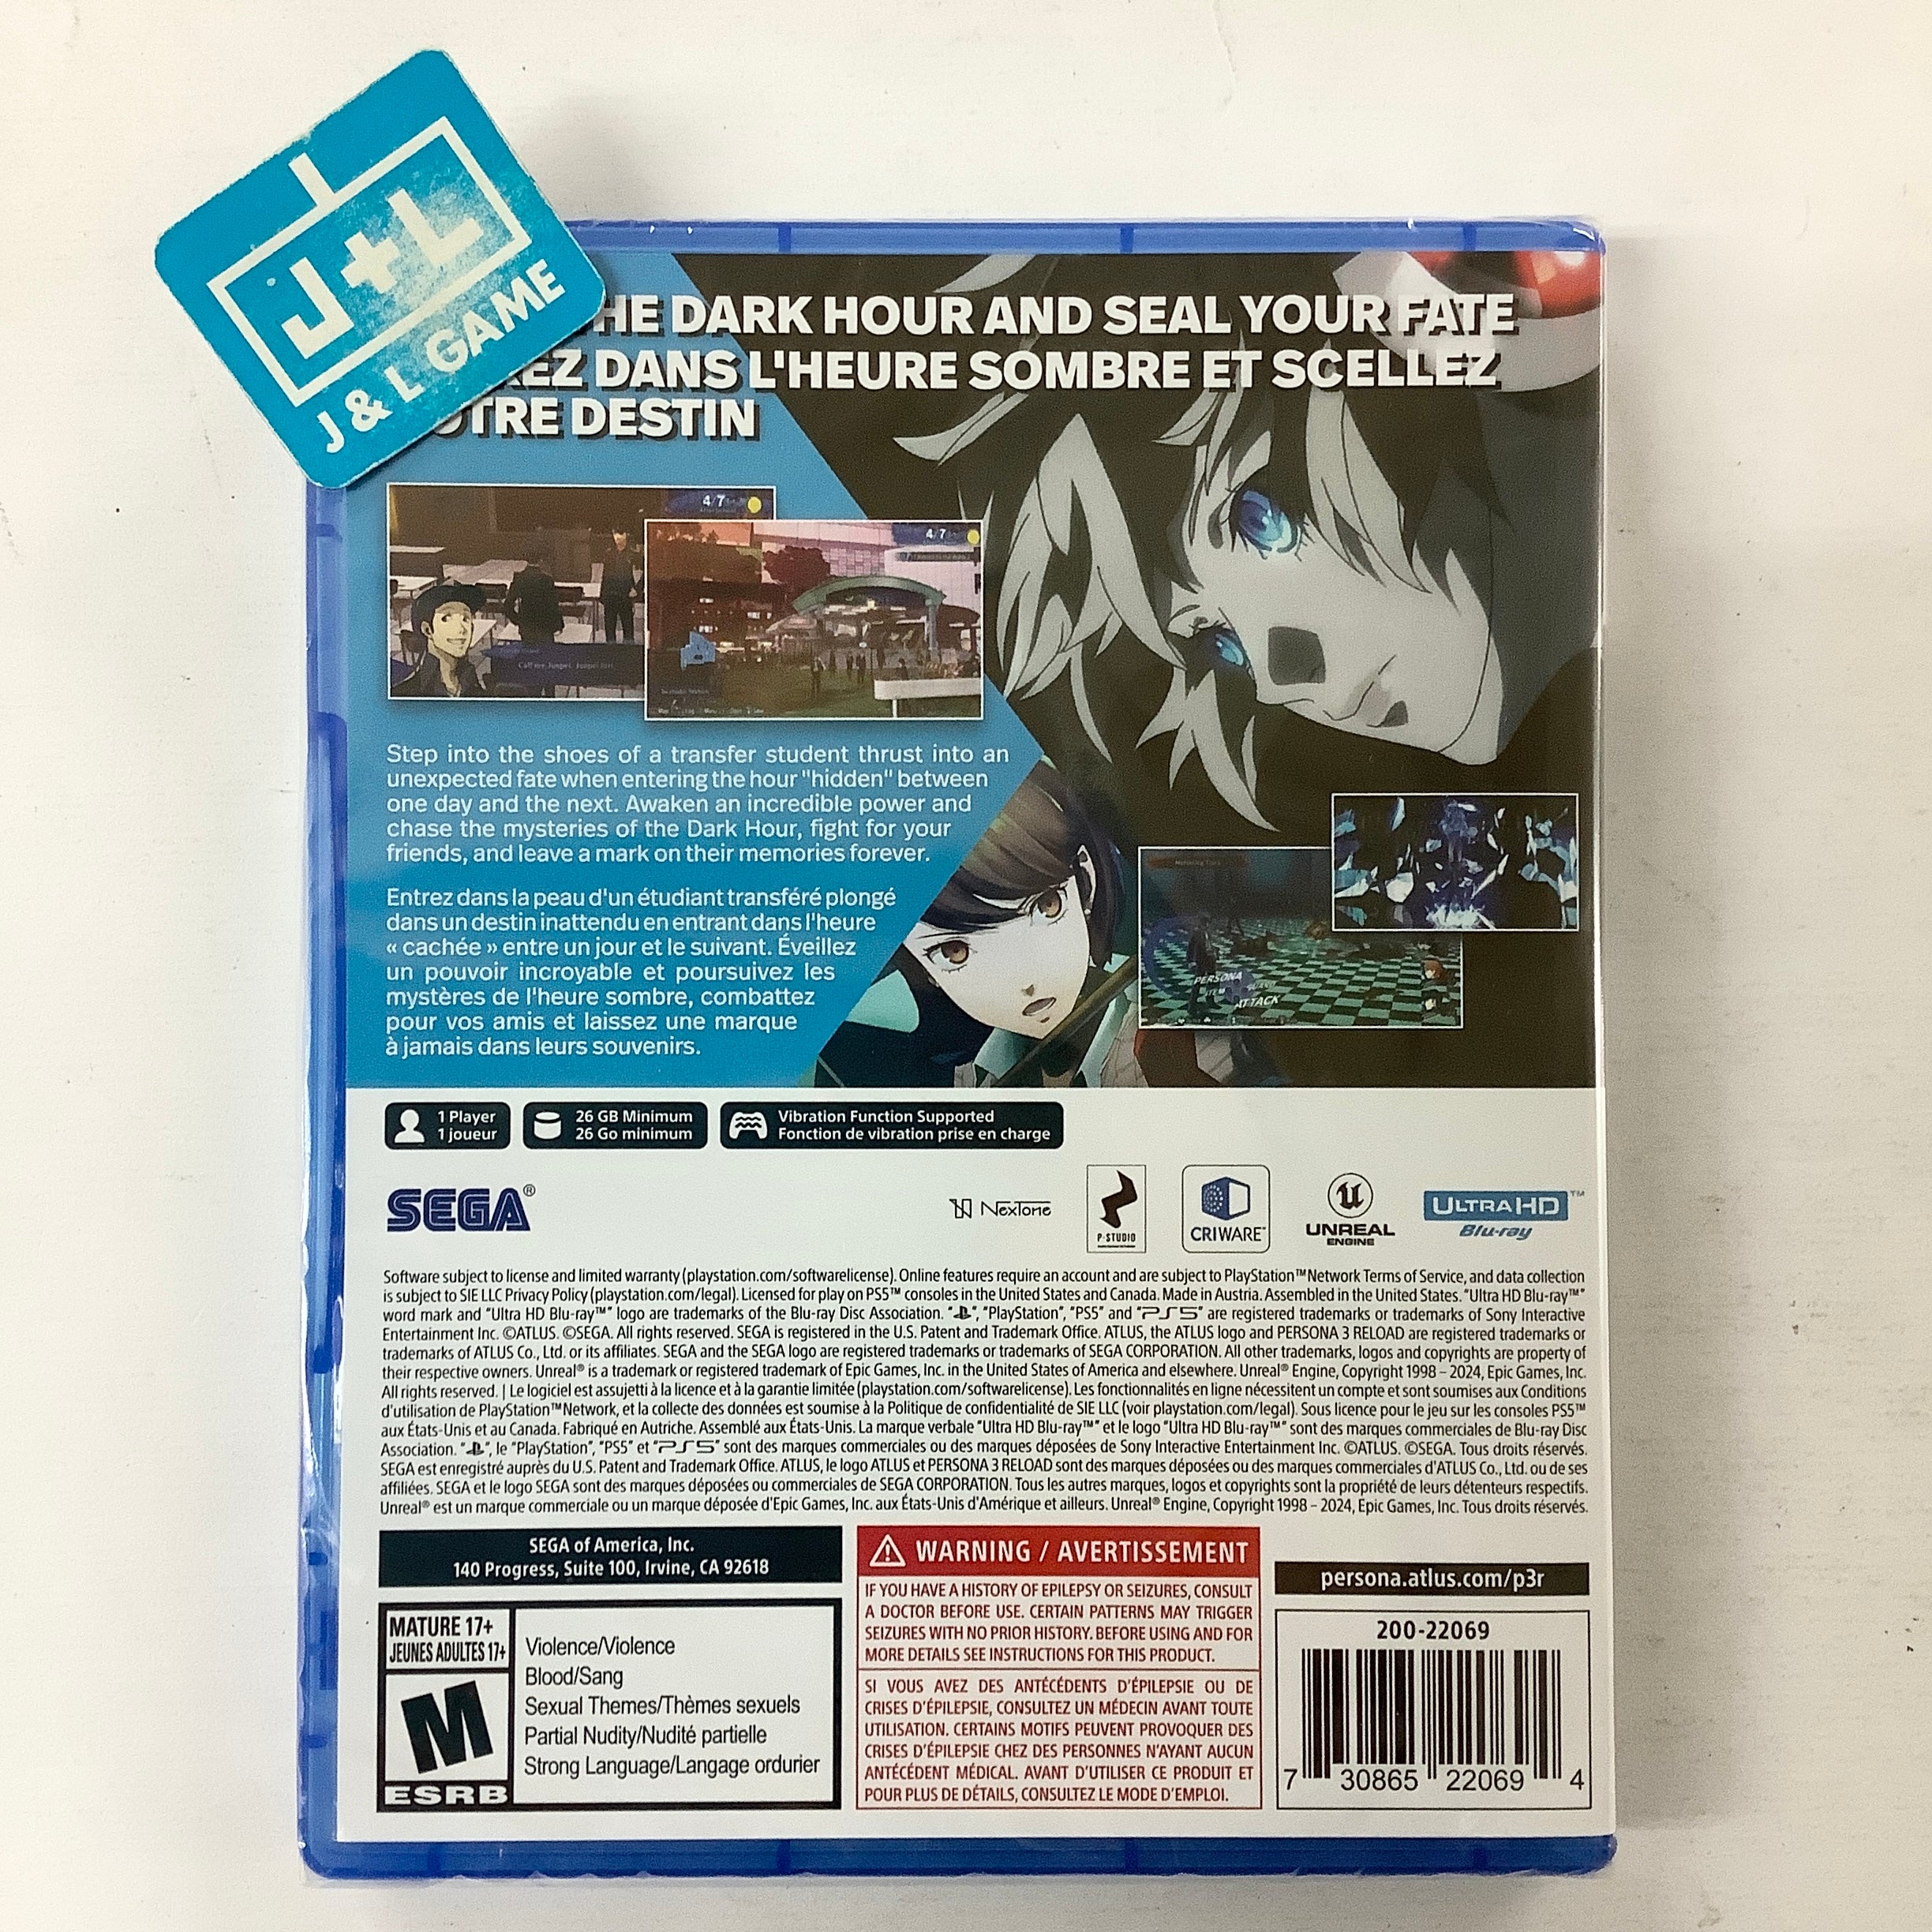 Persona 3 Reload, PlayStation 5 